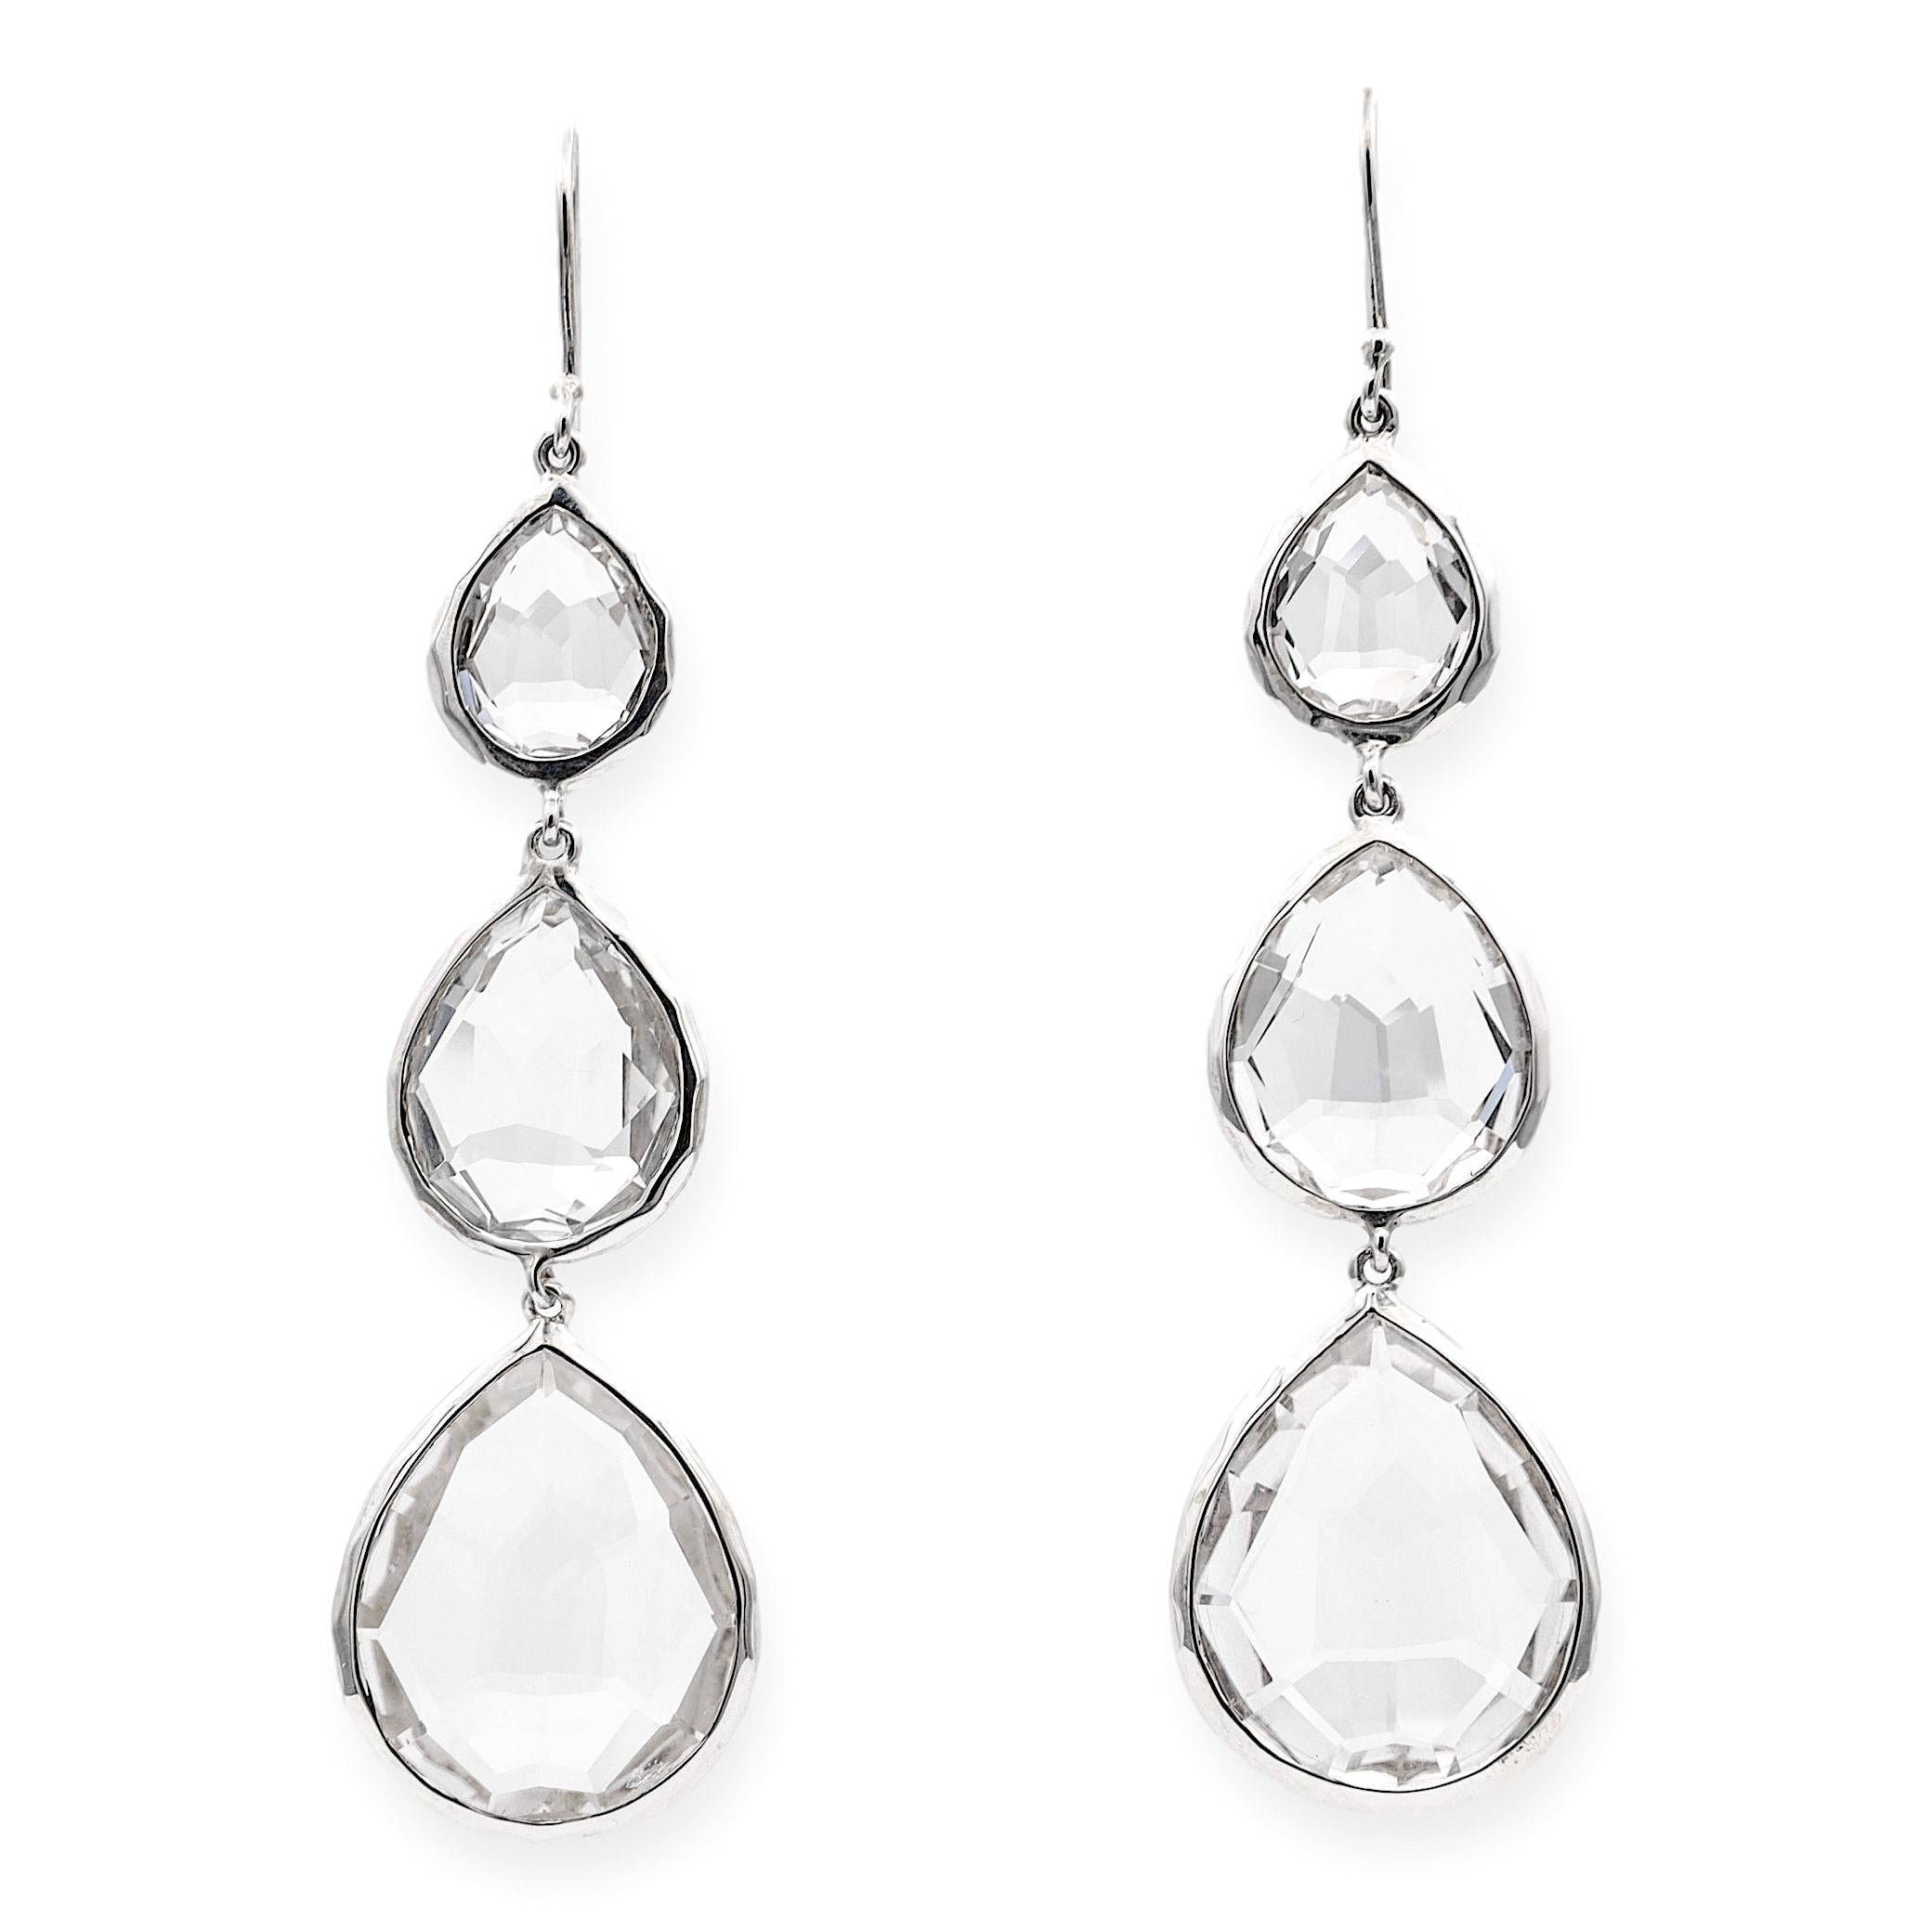 Pair of tear drop earrings by IPPOLITA finely crafted in sterling silver featuring three pear shape rock crystal stones set inside a bezel frame. Earrings drop about 3 inches long with french wire. Fully hallmarked with logo and metal